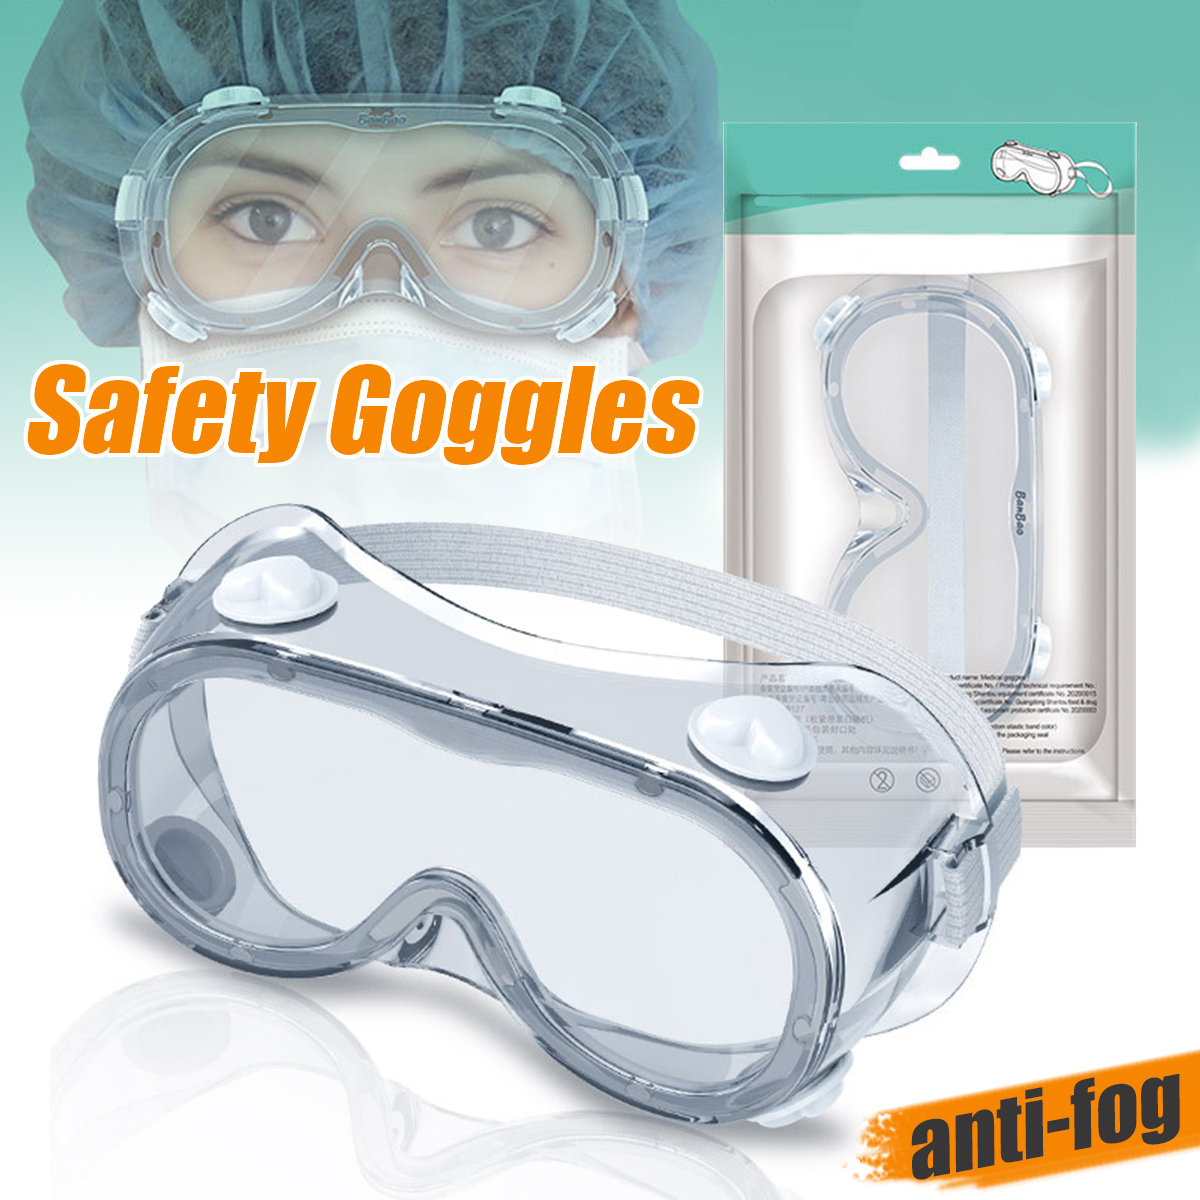 FDA-CE-Safety-Goggles-Anti-Fog-Dust-Protective-Goggles-Splash-proof-Glasses-Lens-Lab-Work-Eye-Protec-1649728-1